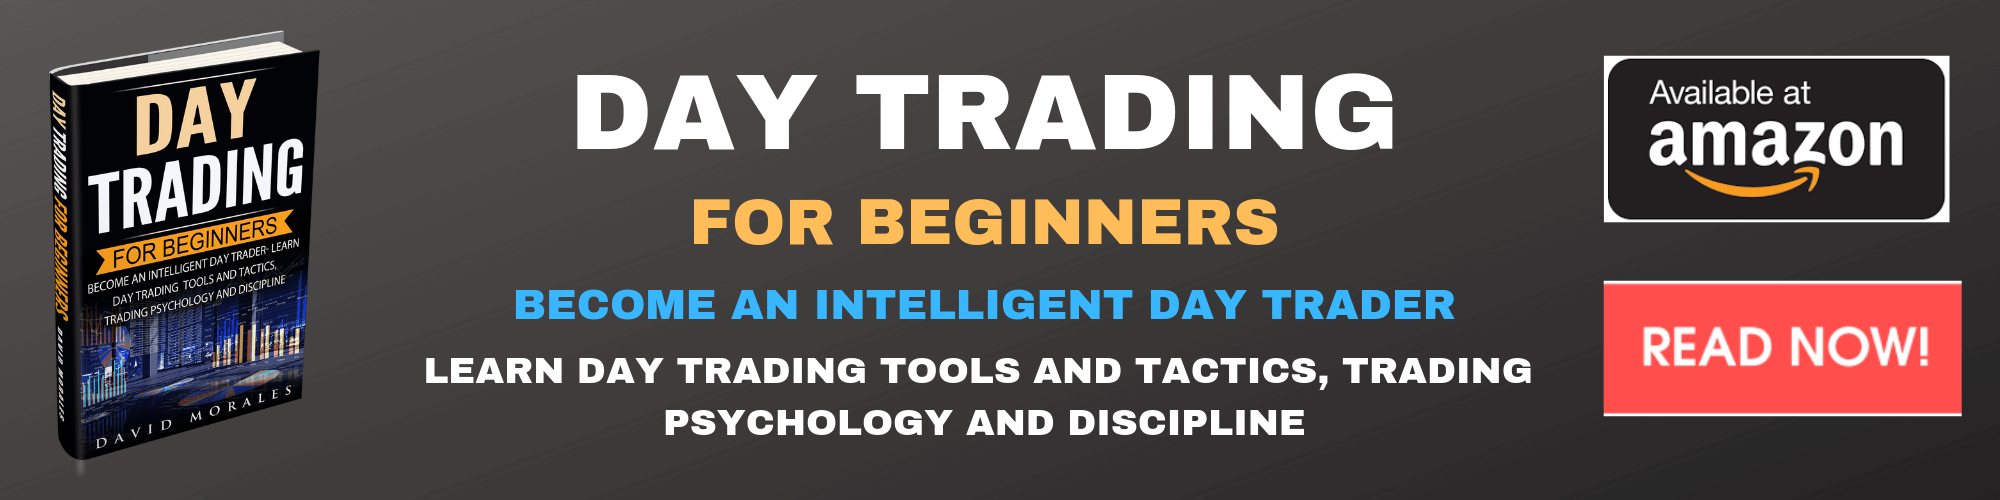 Day Trading for beginners